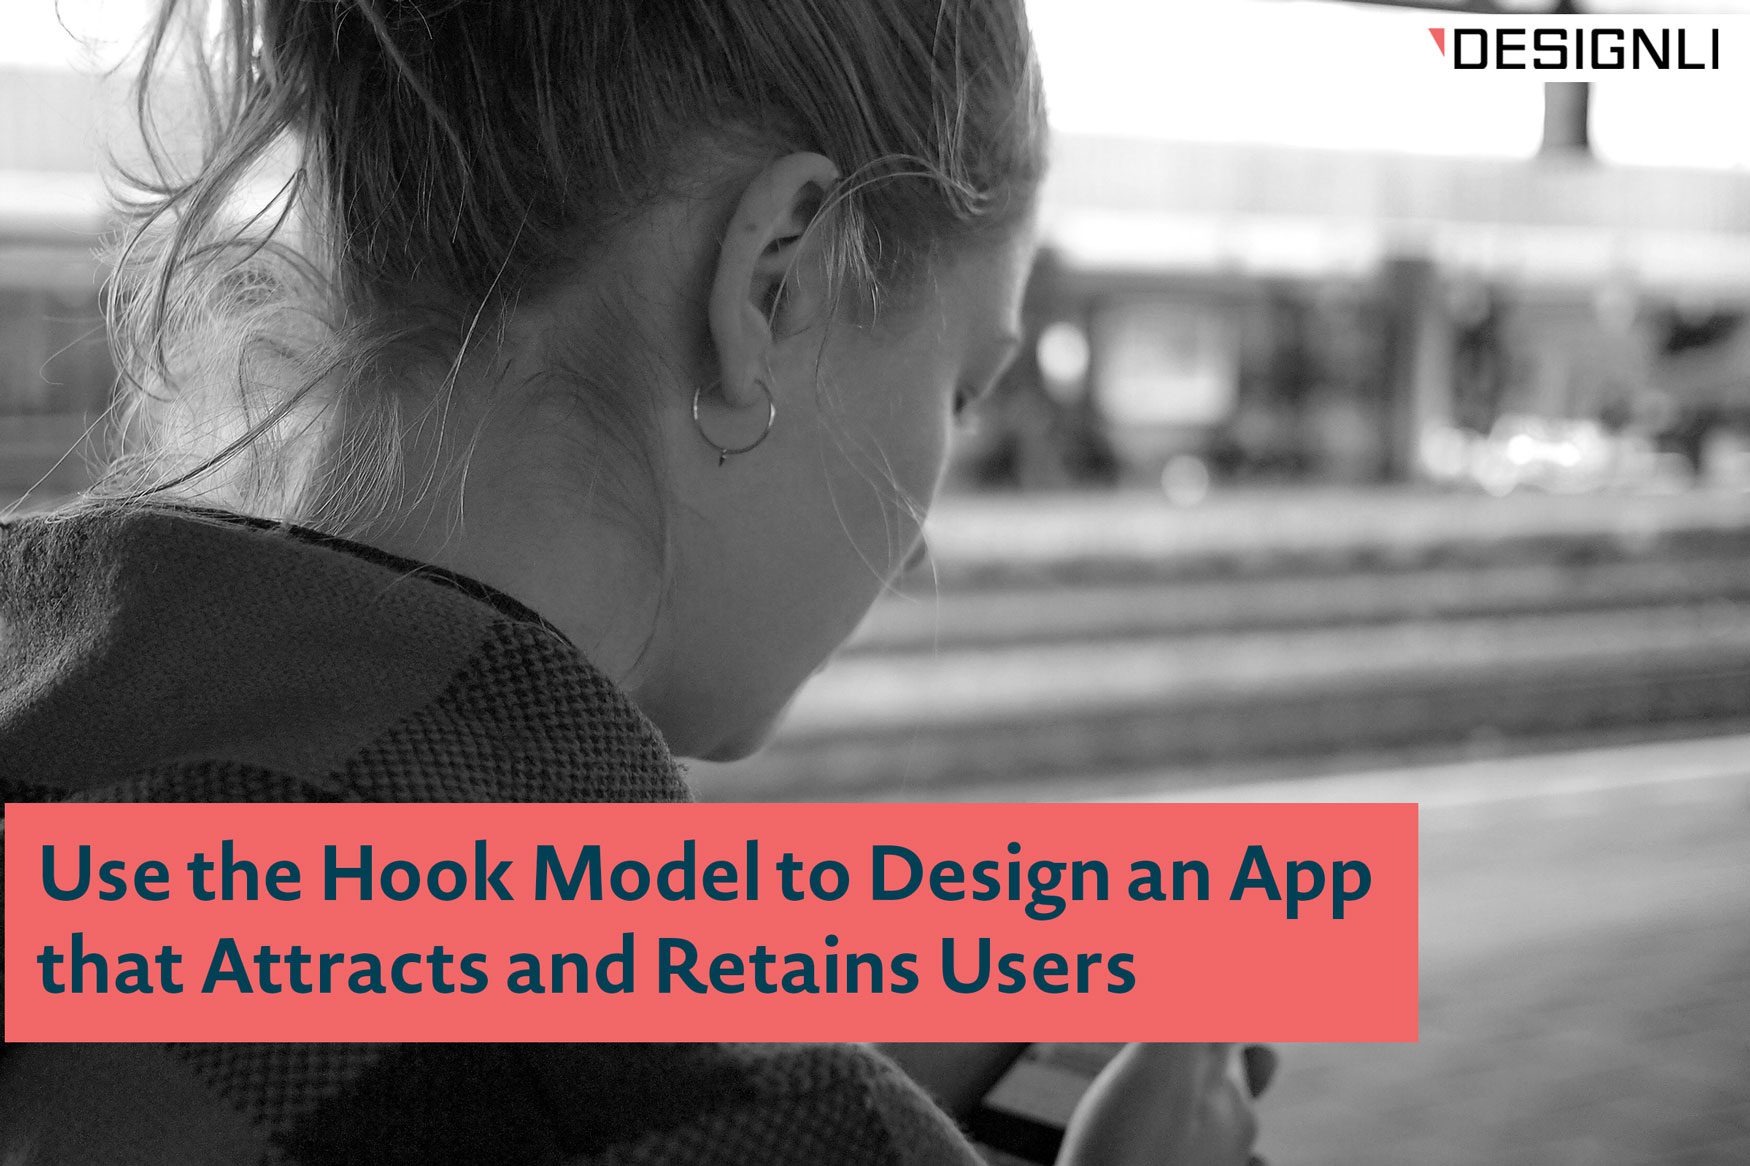 Use the Hook Model to Design an App that Attracts and Retains Users